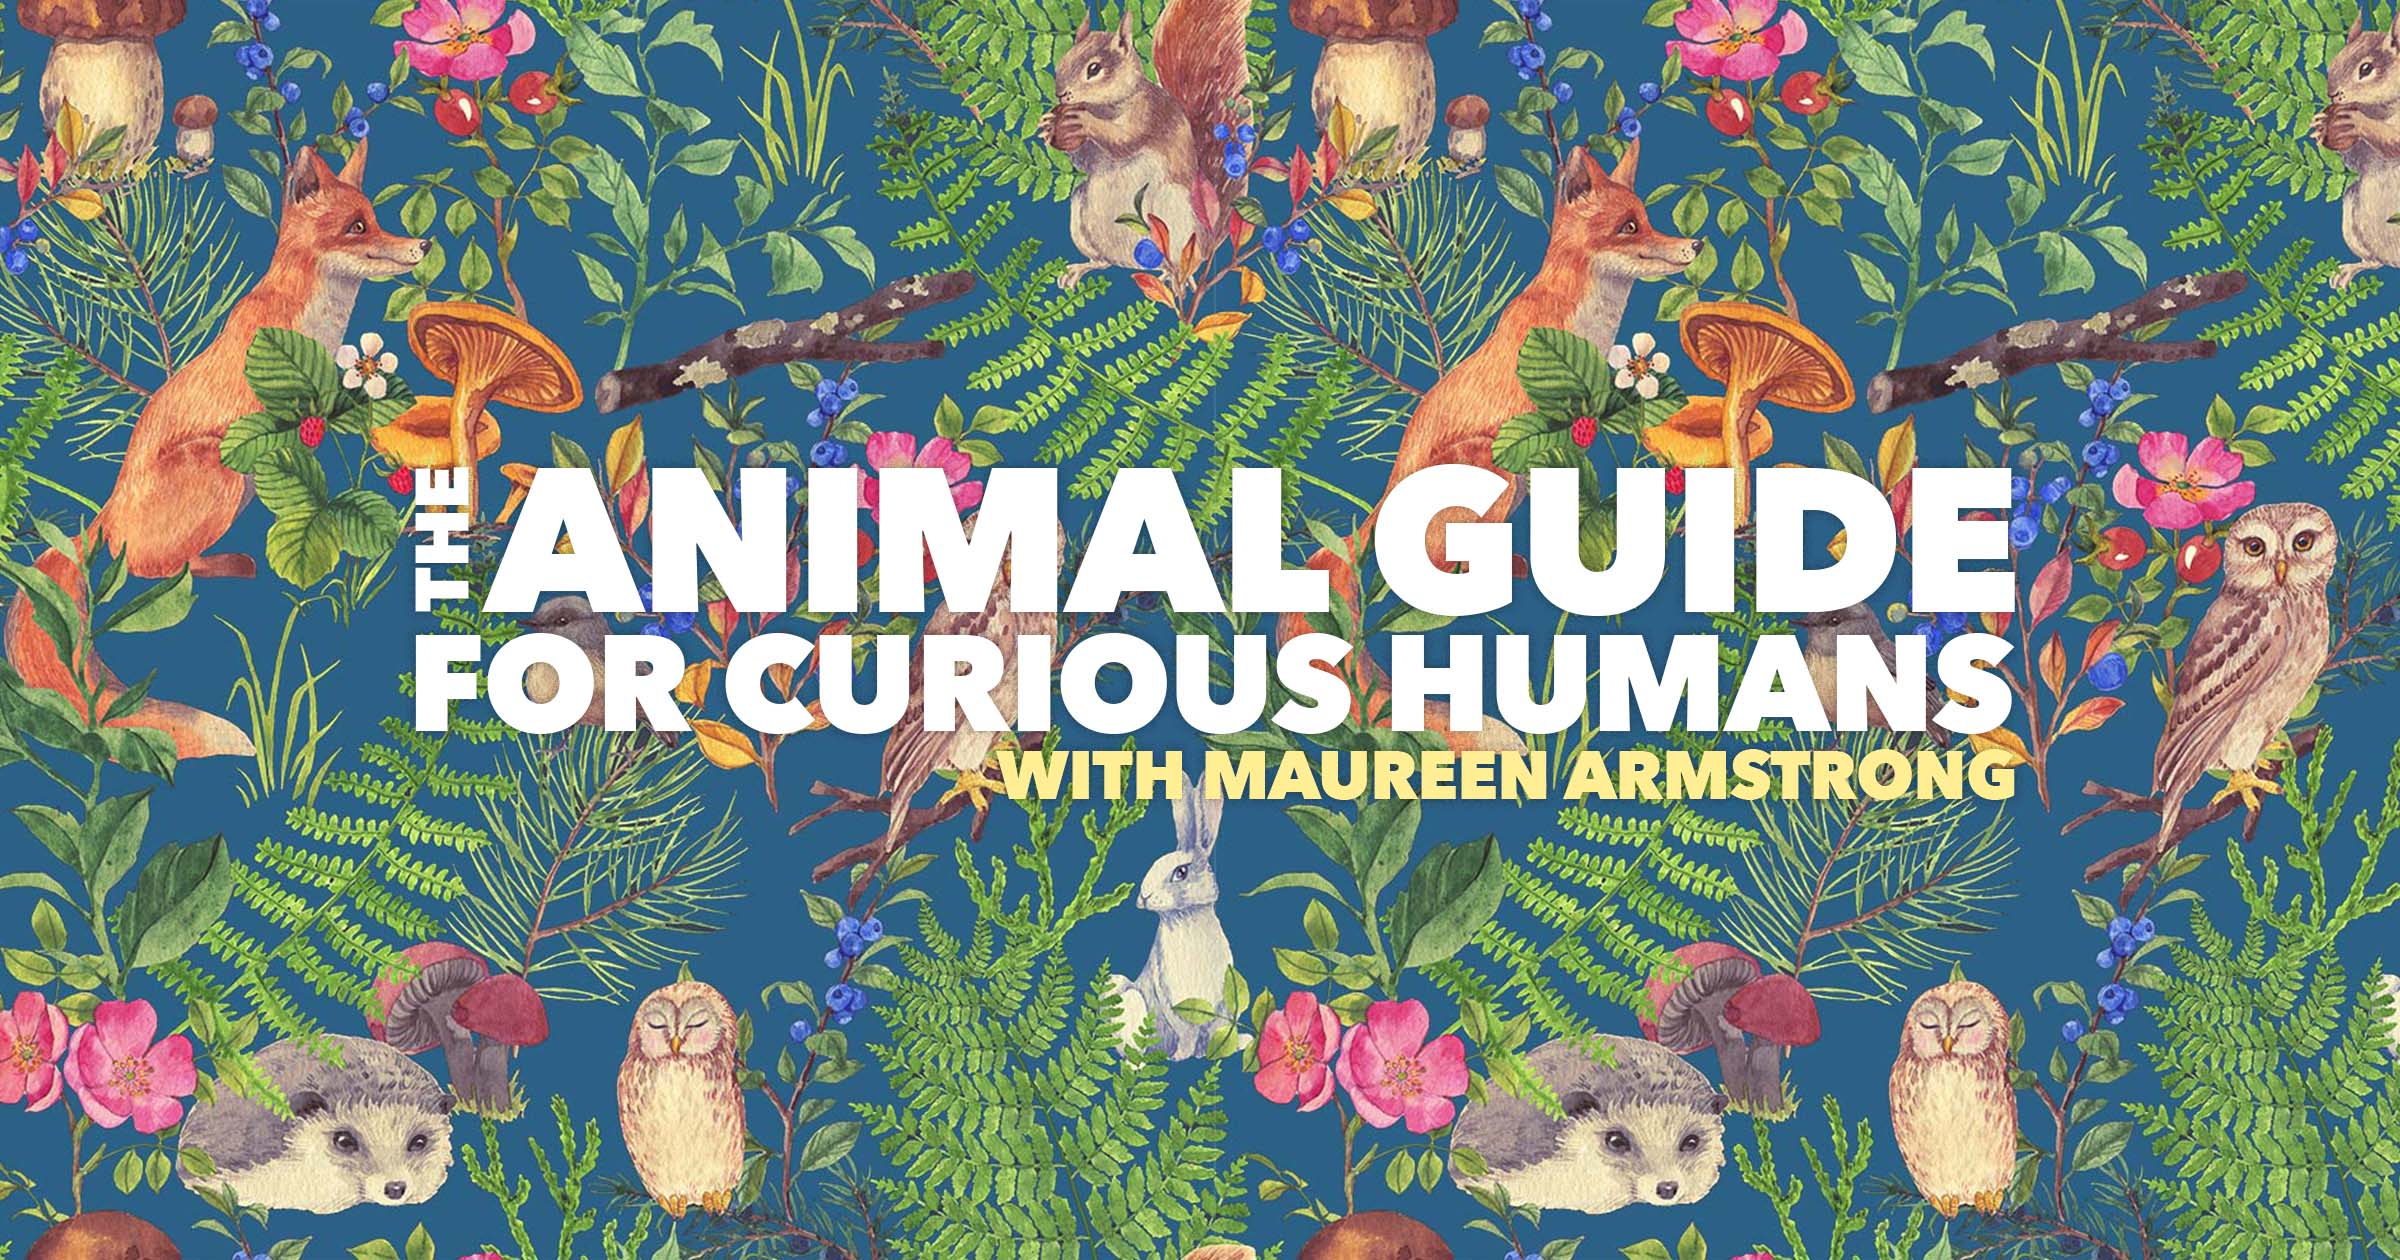 The Animal Guide for Curious Humans with Maureen Armstrong